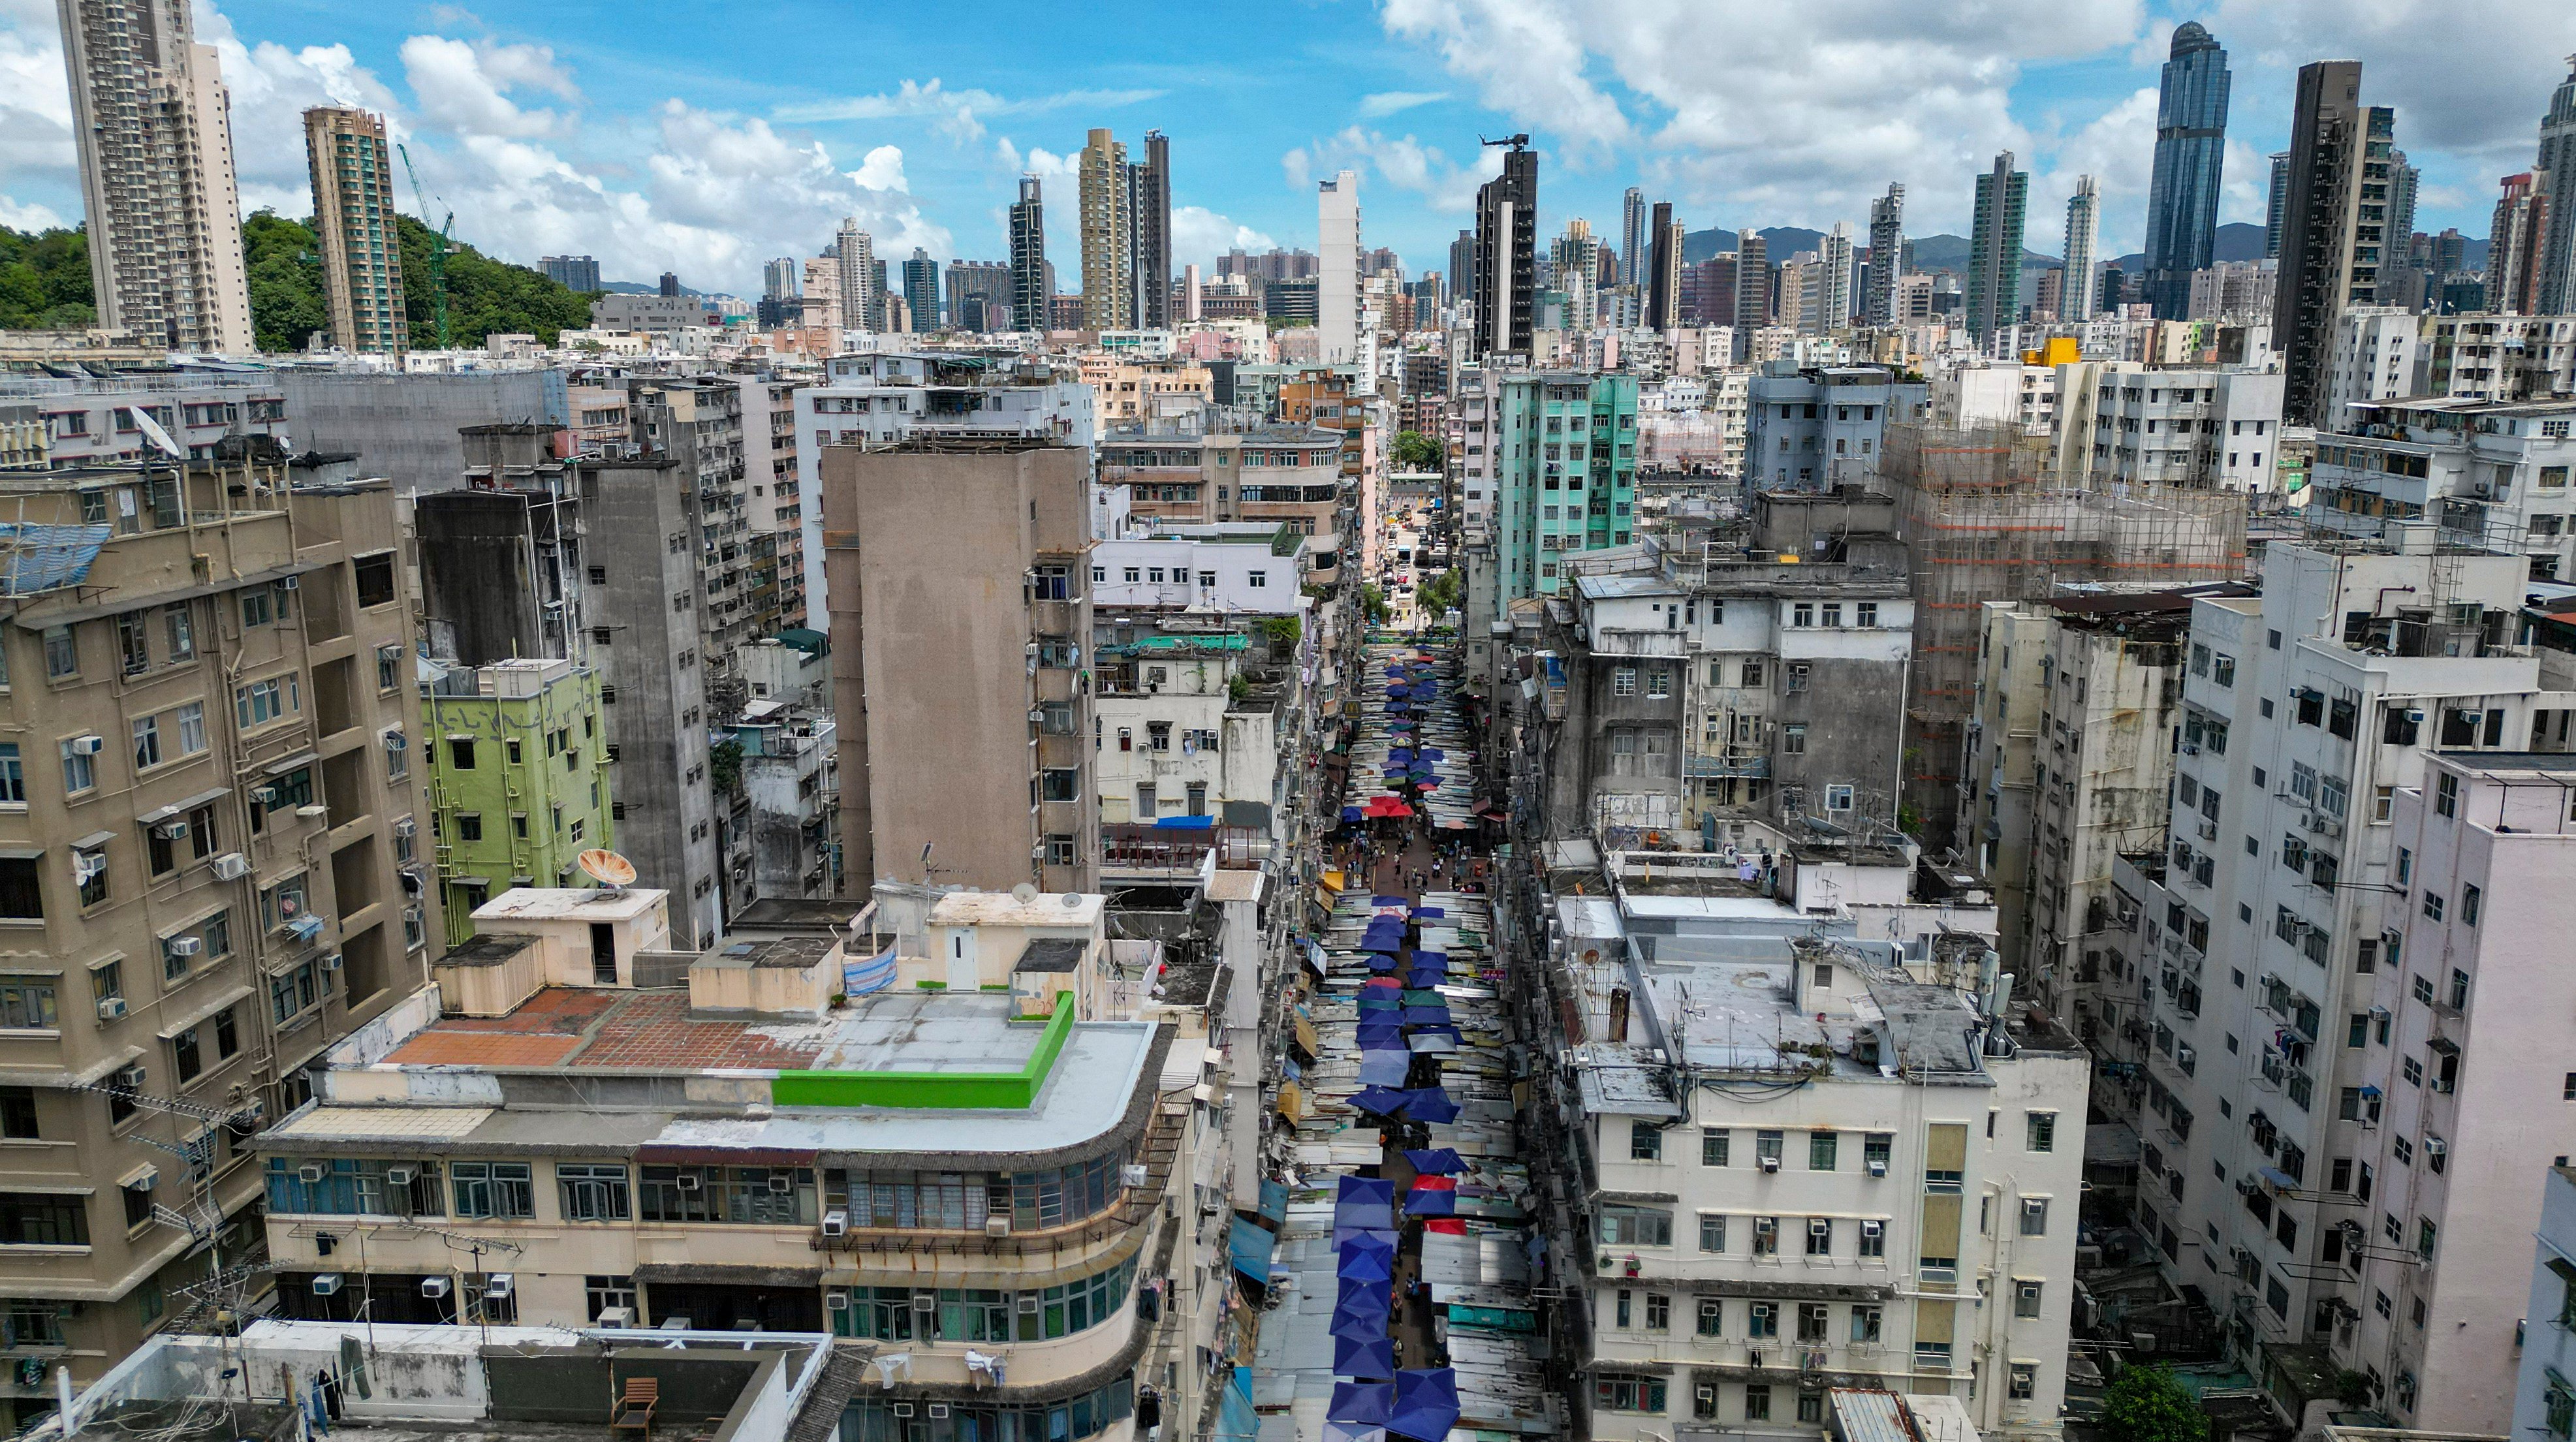 A view of buildings in Sham Shui Po last year. In Hong Kong, buildings account for over 60 per cent of carbon emissions, much higher than the global average. Photo: May Tse